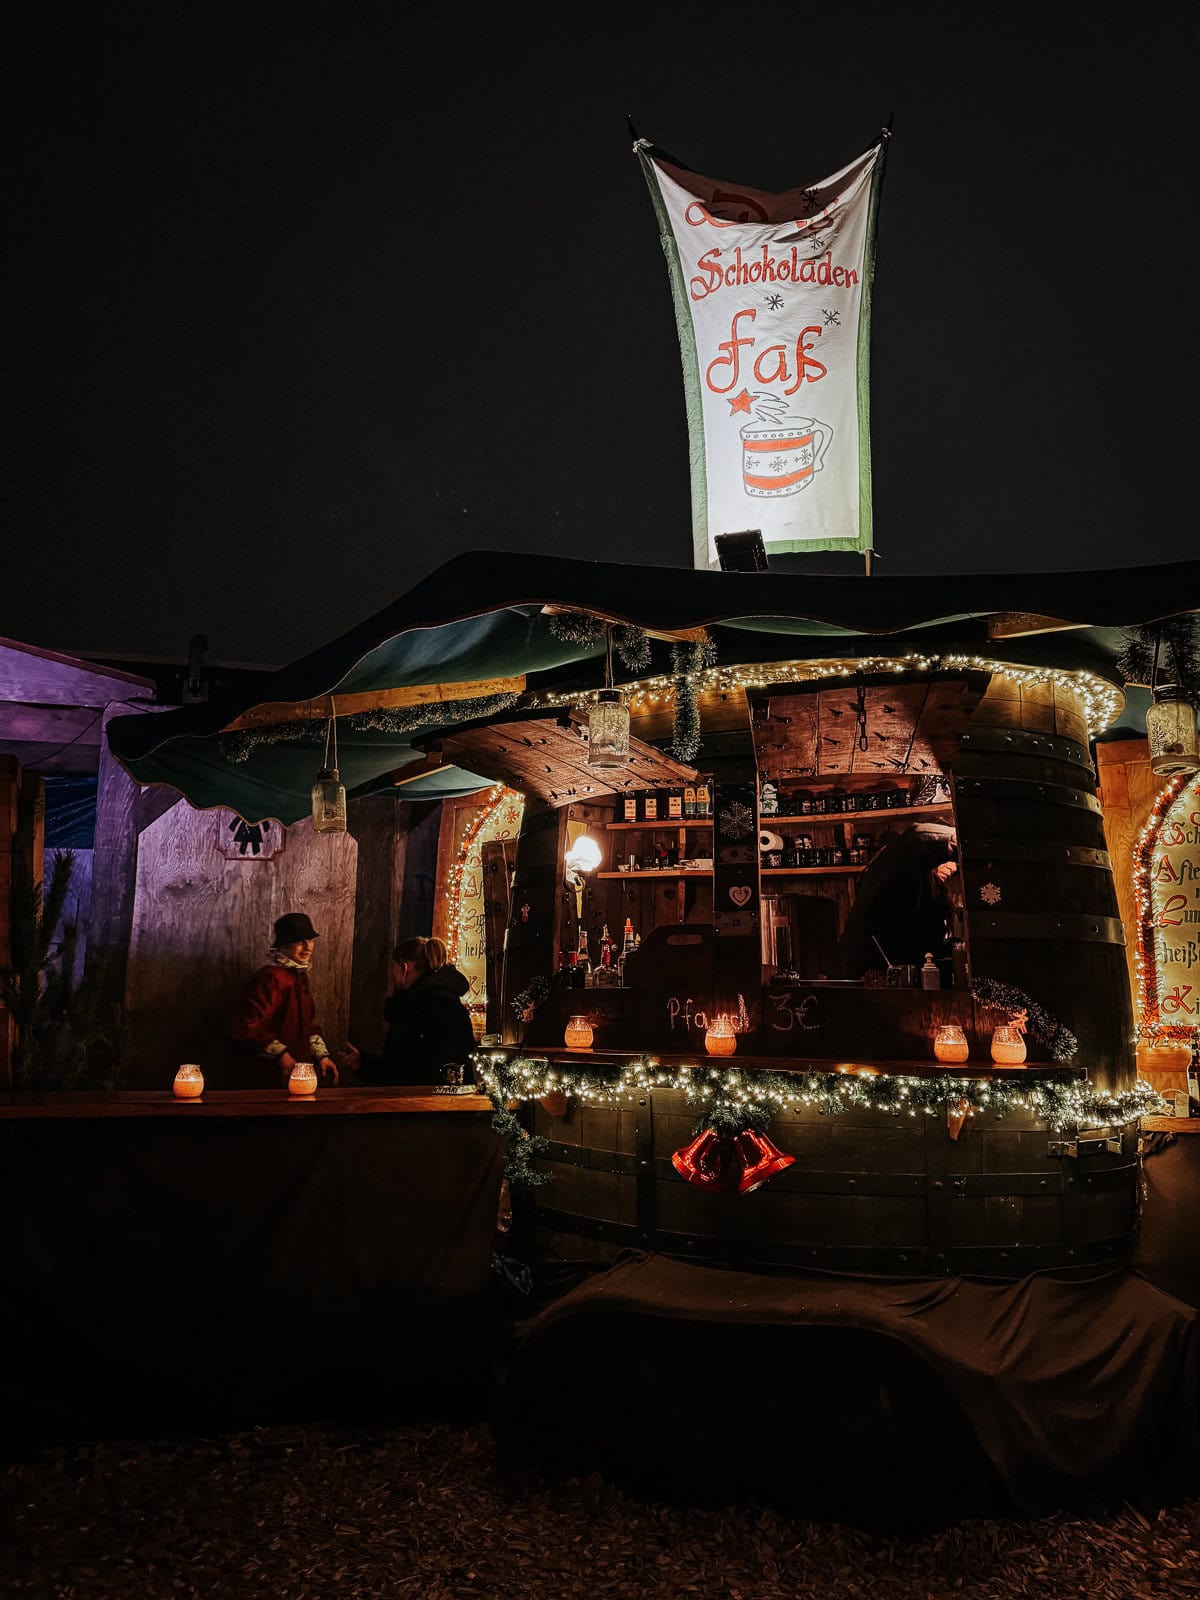 An intimate night market scene featuring a booth styled like a giant barrel, selling hot beverages. The booth is festively decorated with Christmas lights and offers a warm ambiance in the evening chill.